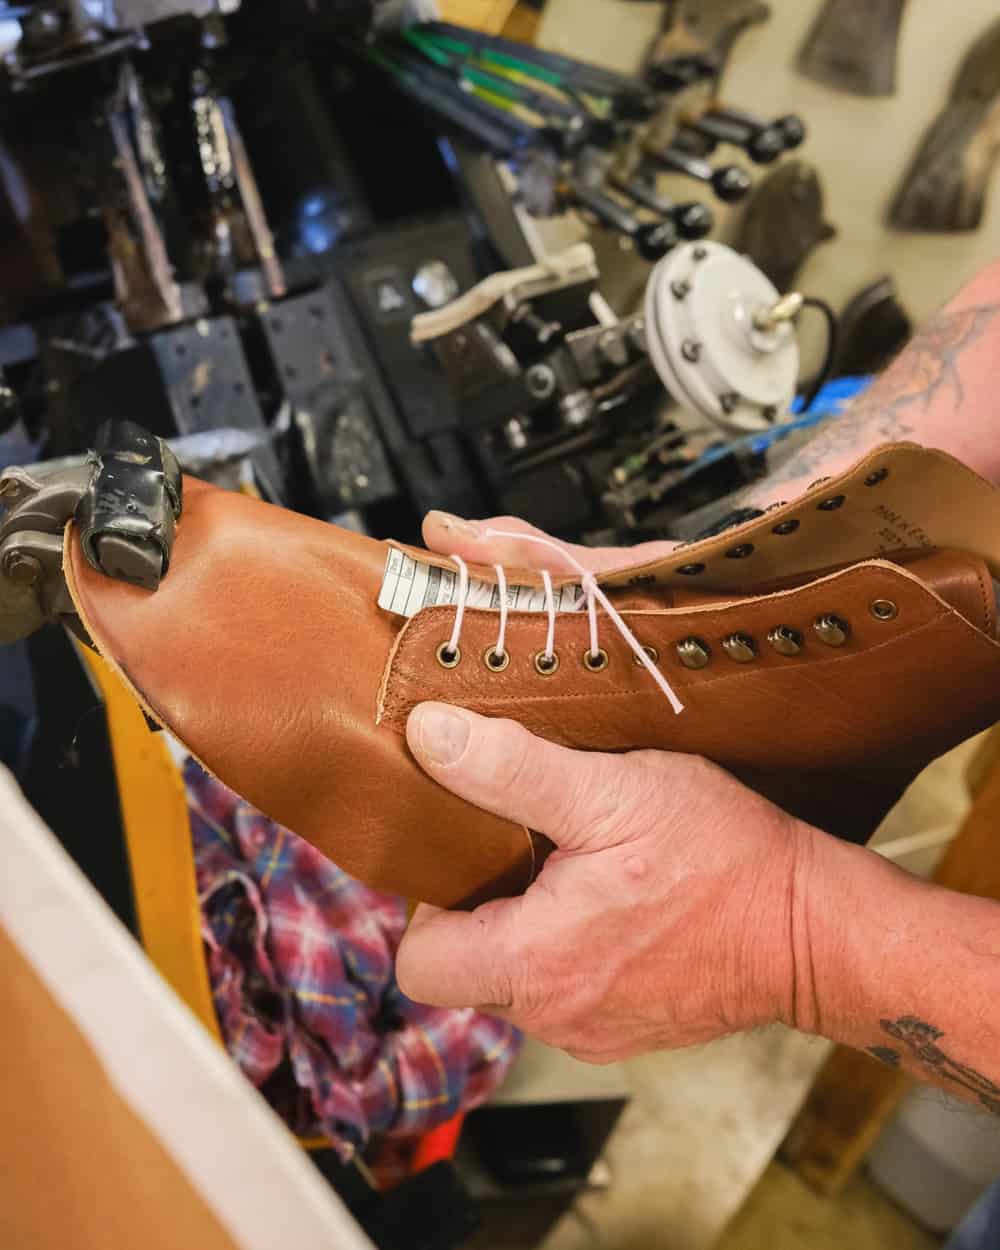 Shoemaker sculpting a boot upper in a traditional way